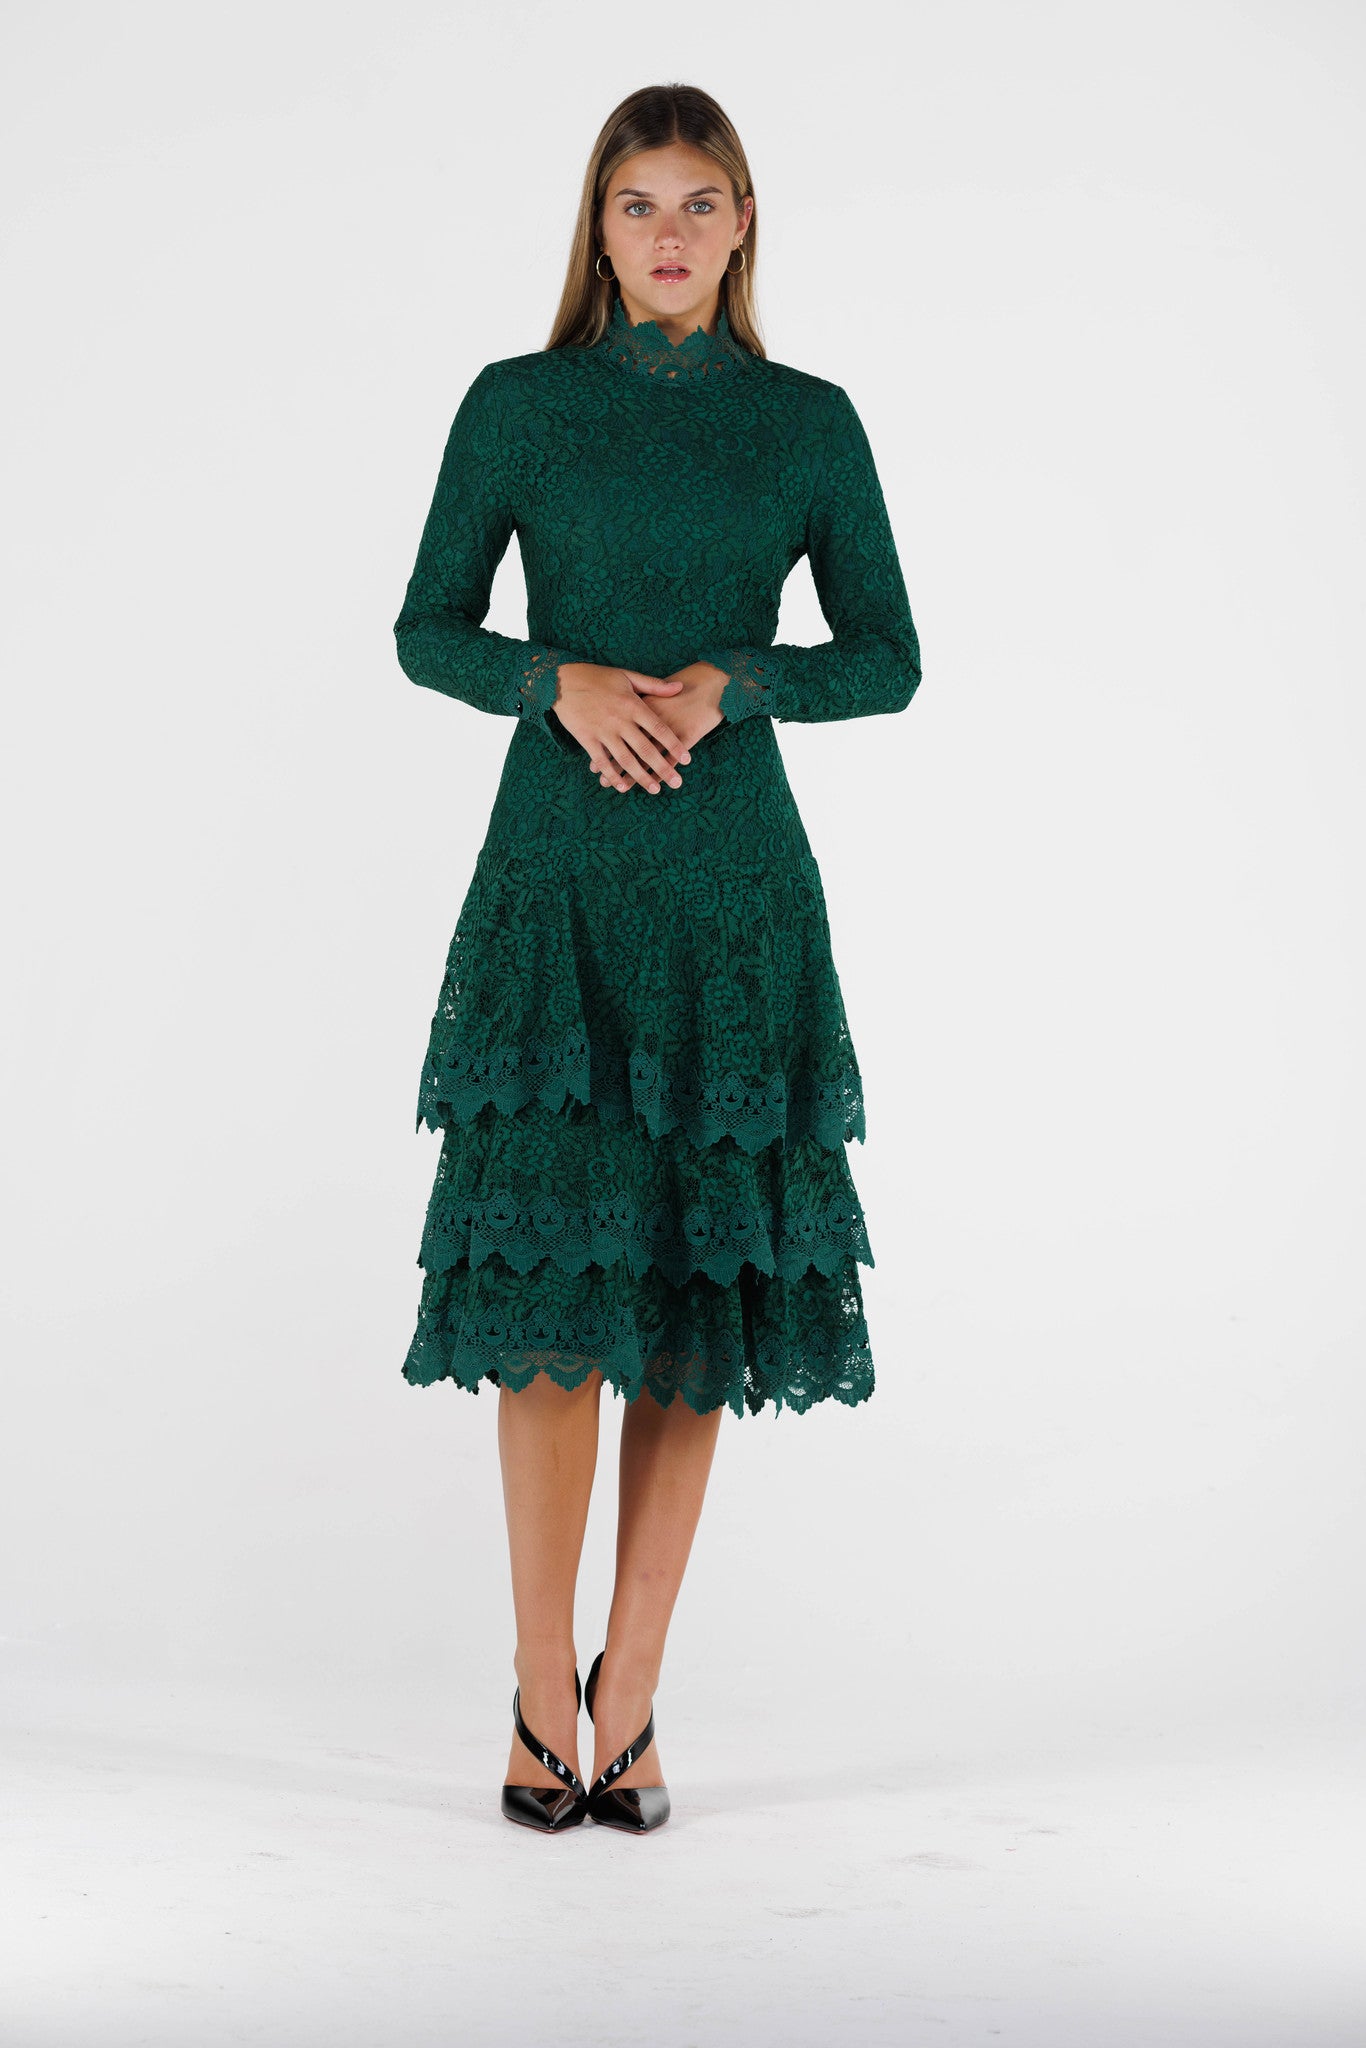 GREEN LACE DRESS – style & trend